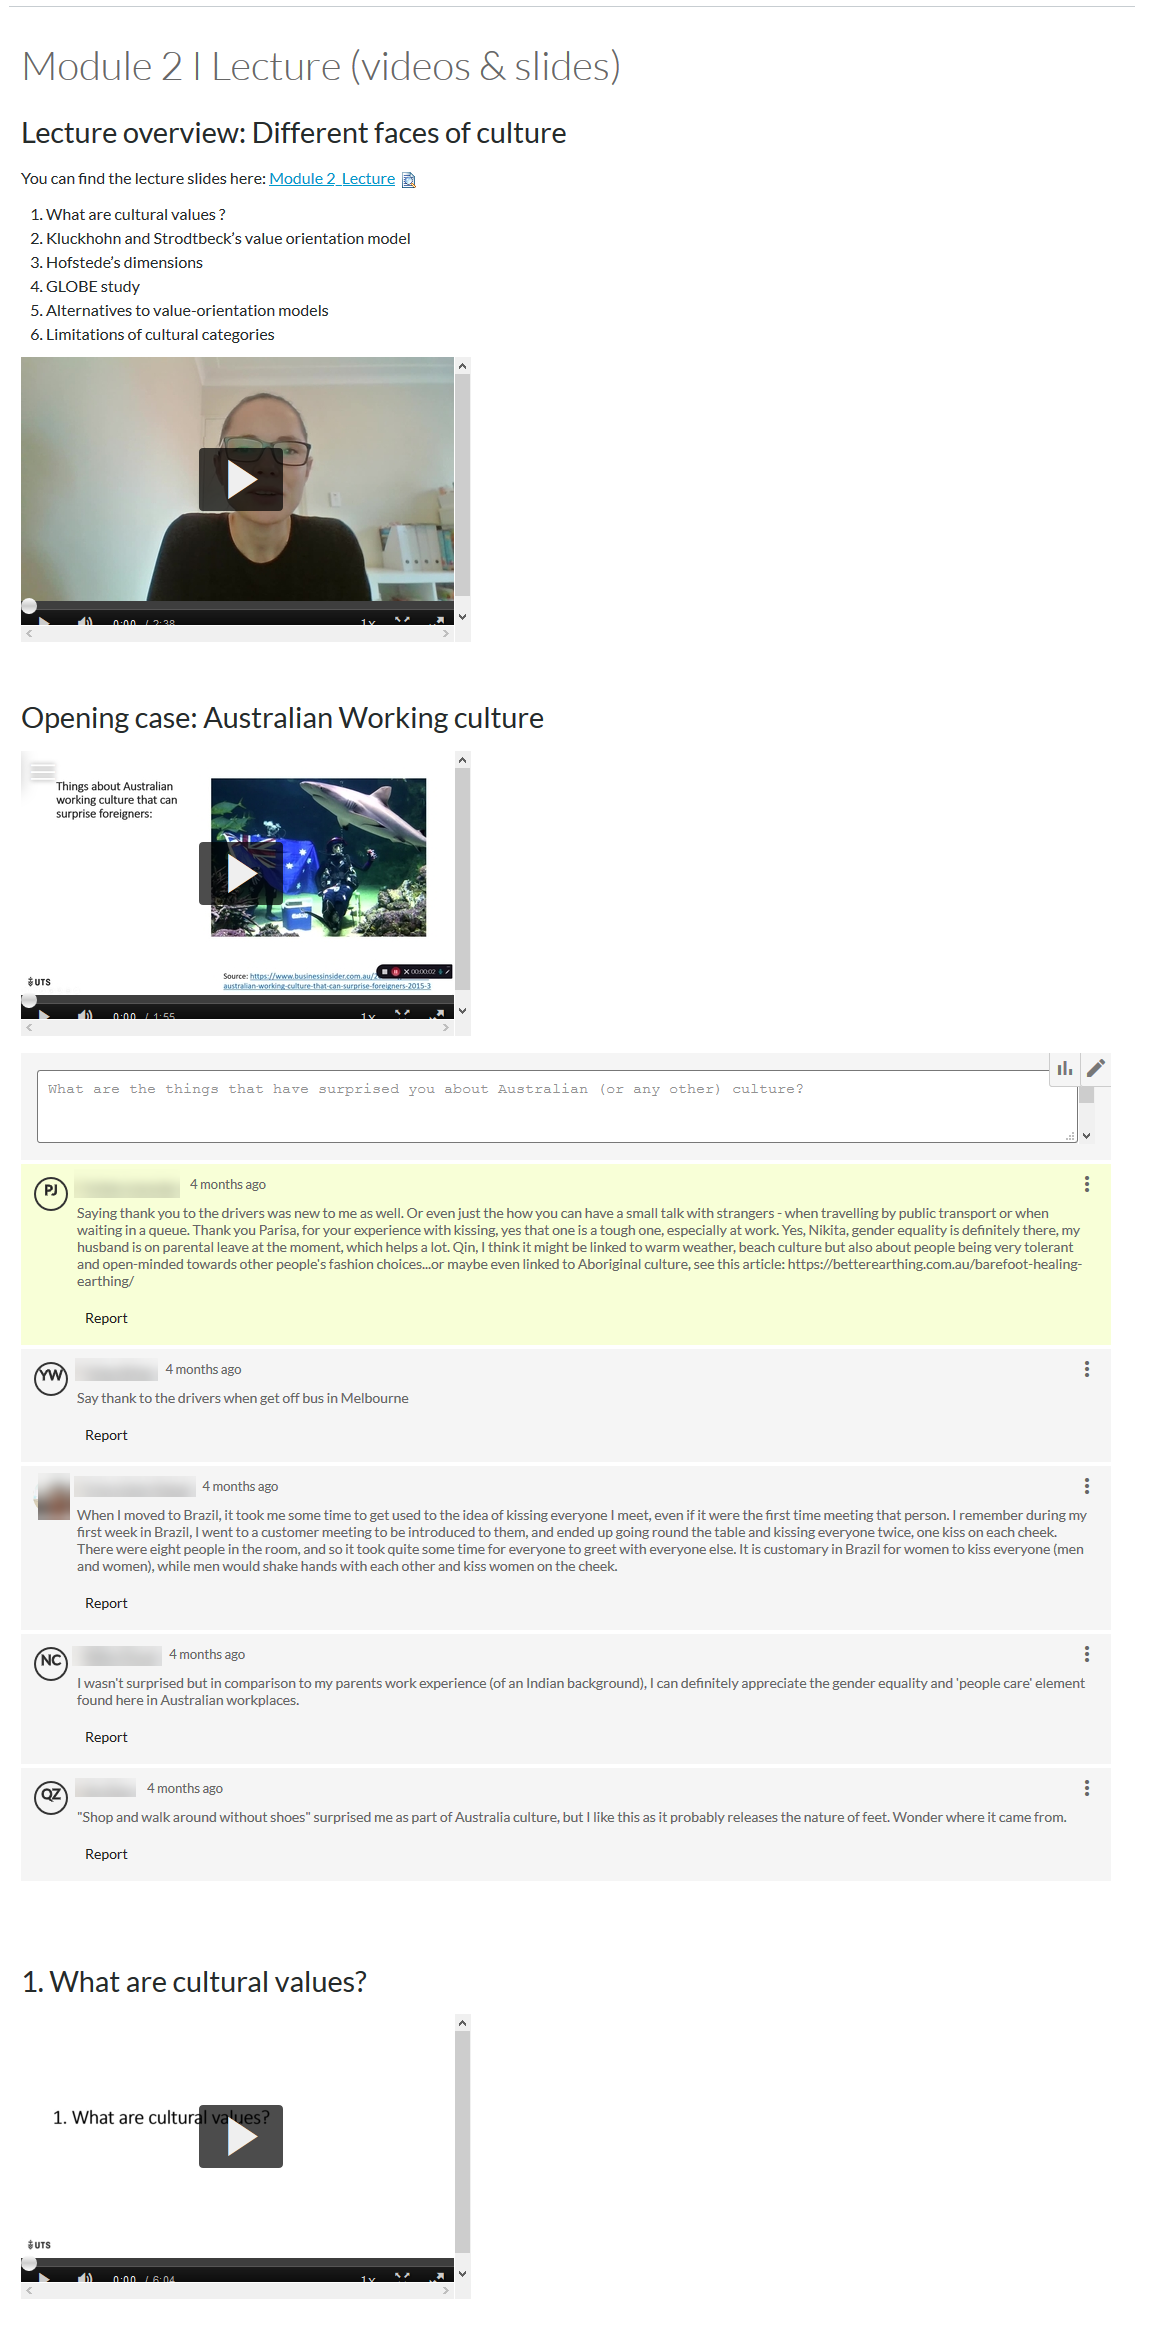 A module page with shortened lecture videos separated by a comments box so that students are able to engage with the video material.